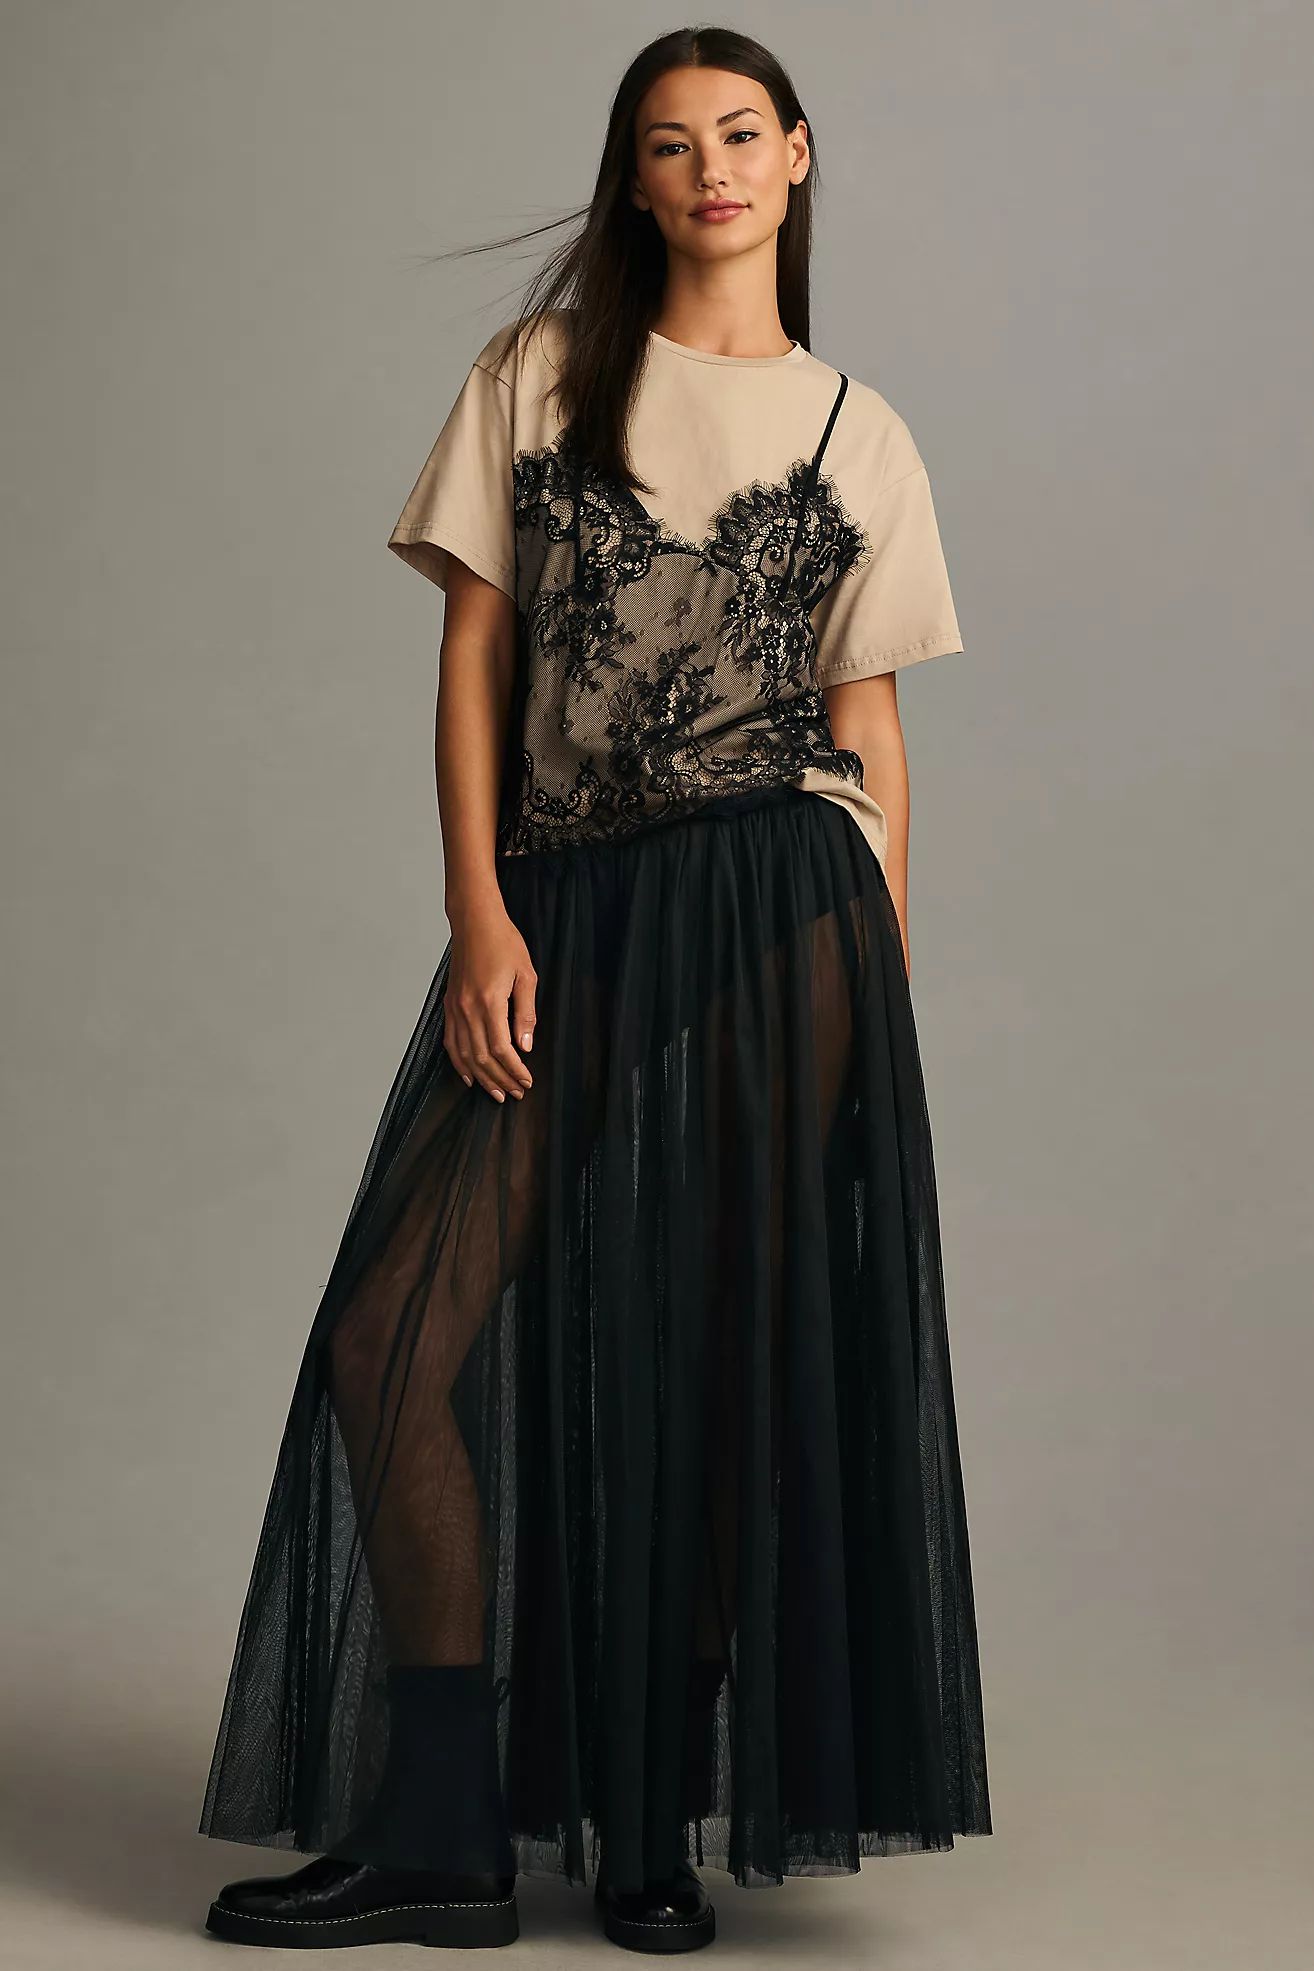 By Anthropologie Sheer Tulle Maxi Skirt | Anthropologie (US)